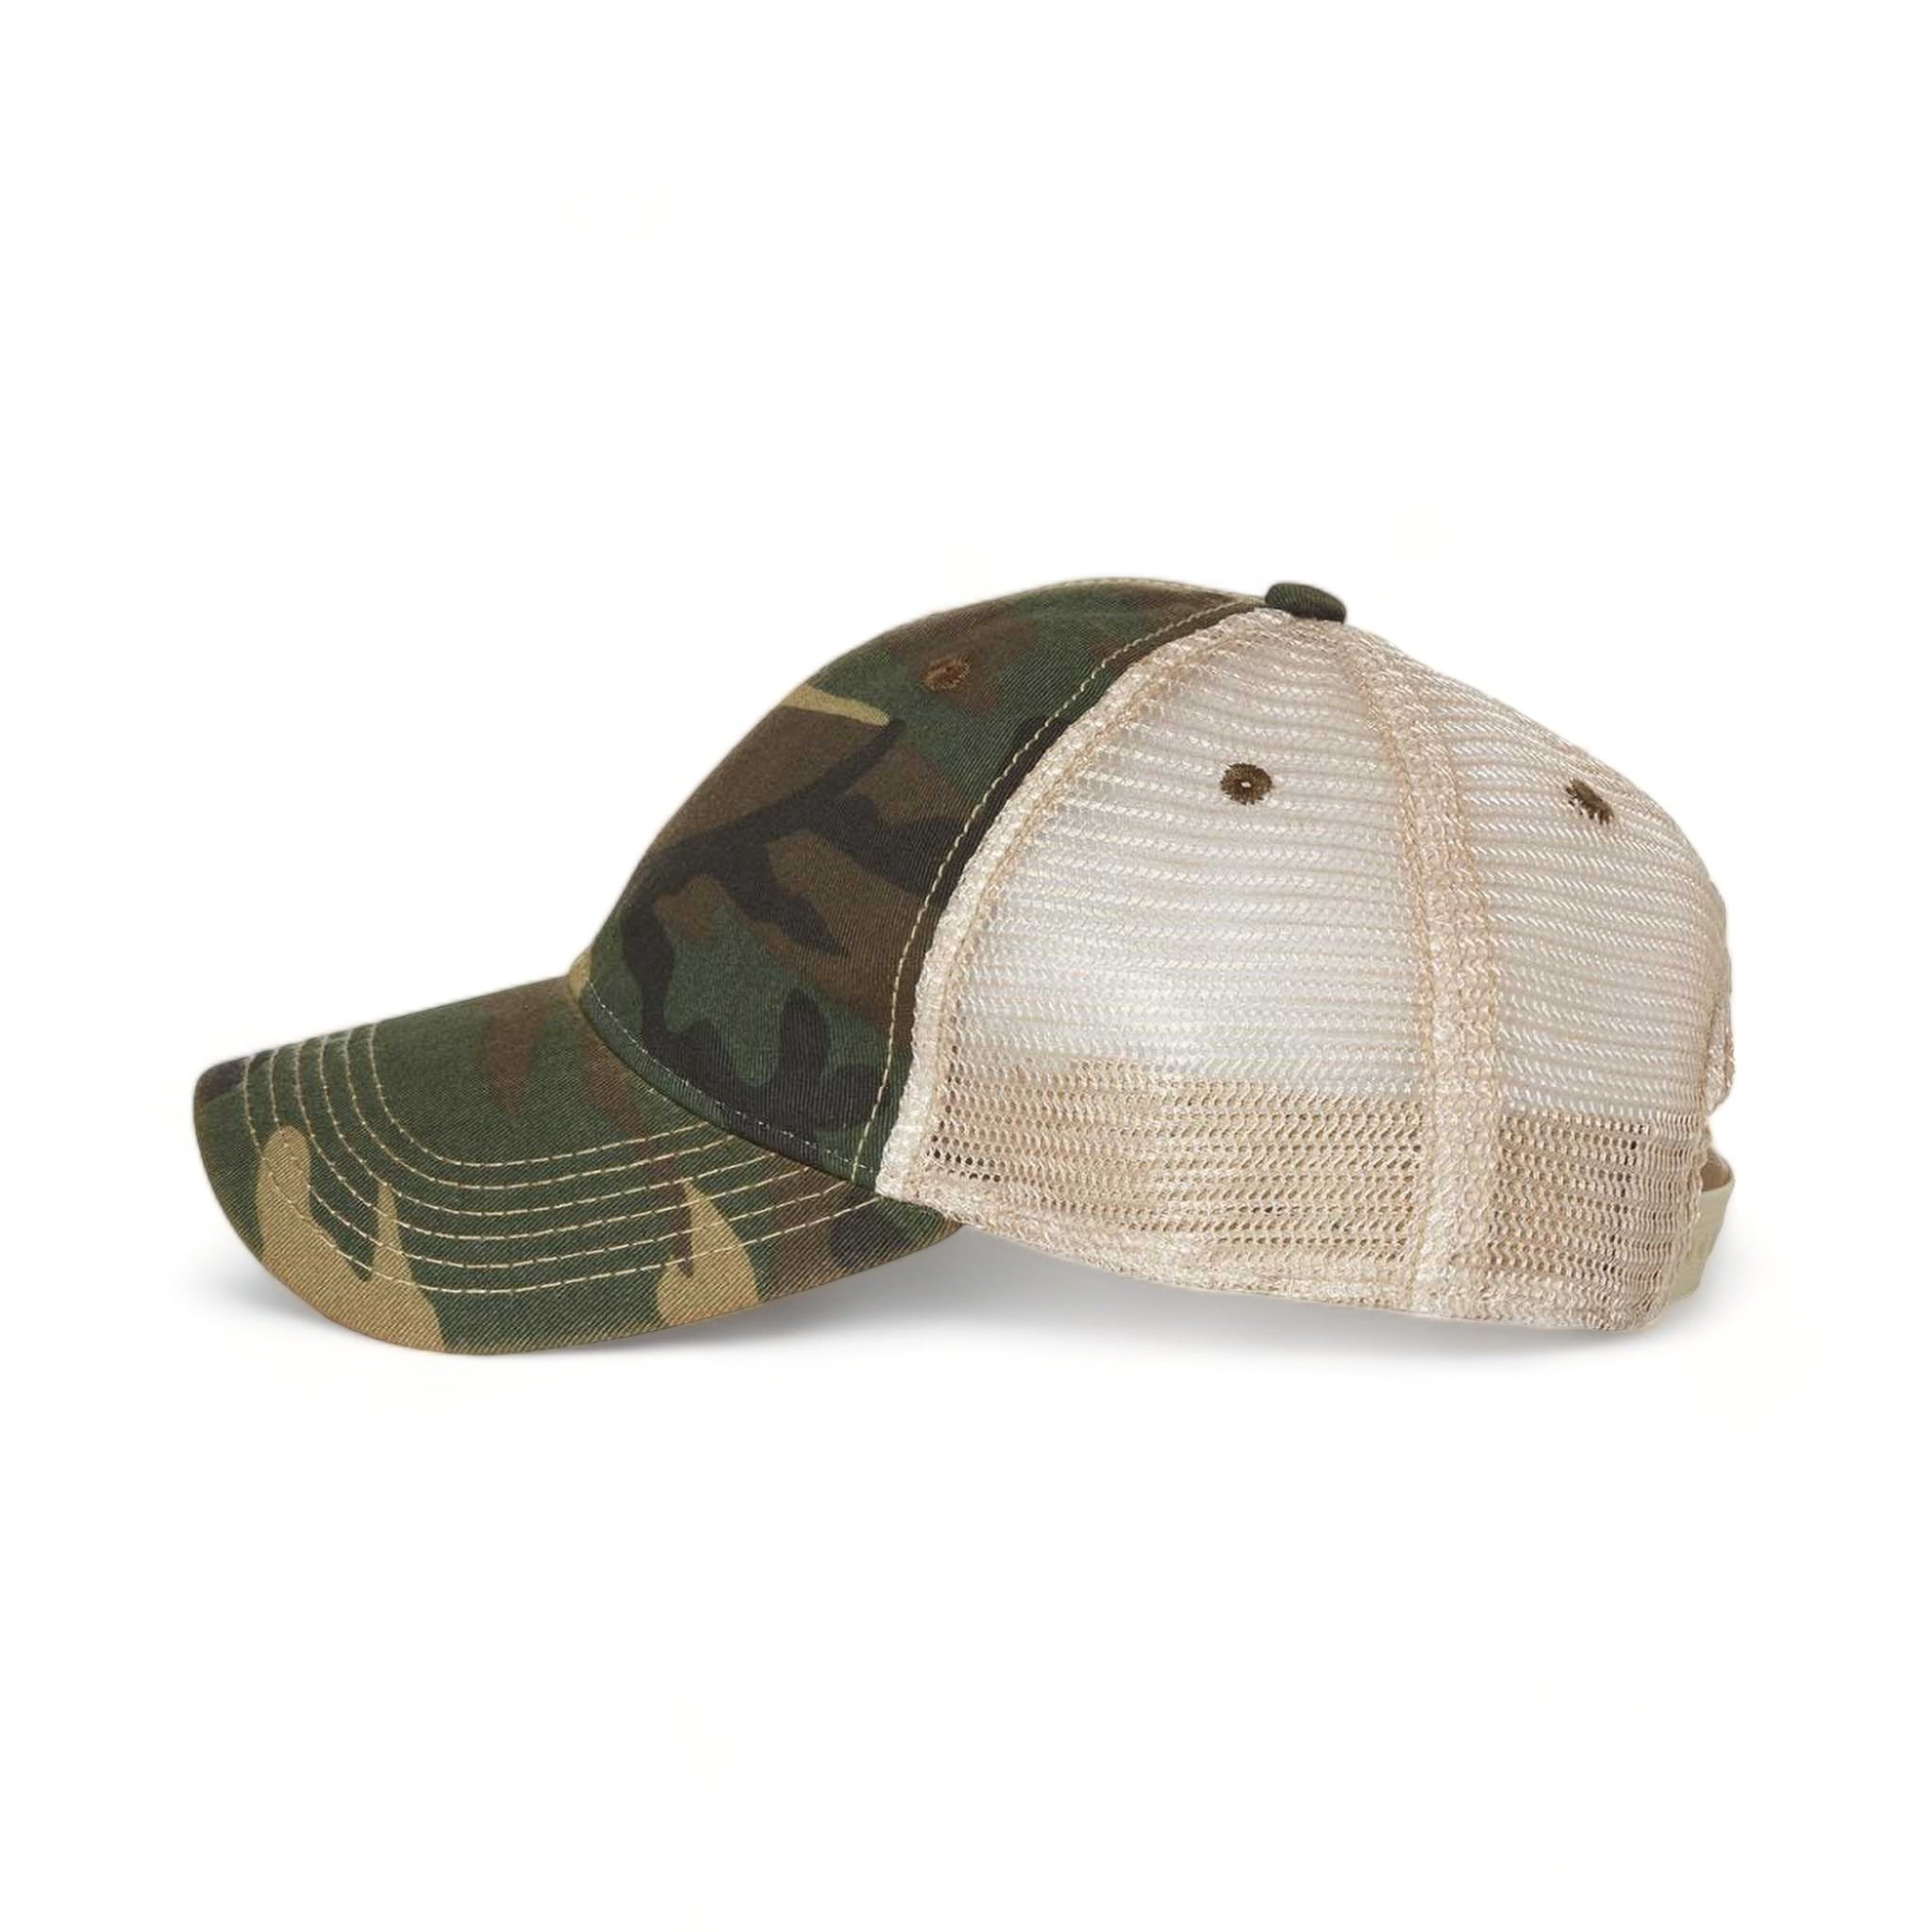 Side view of LEGACY OFA custom hat in army camo and khaki